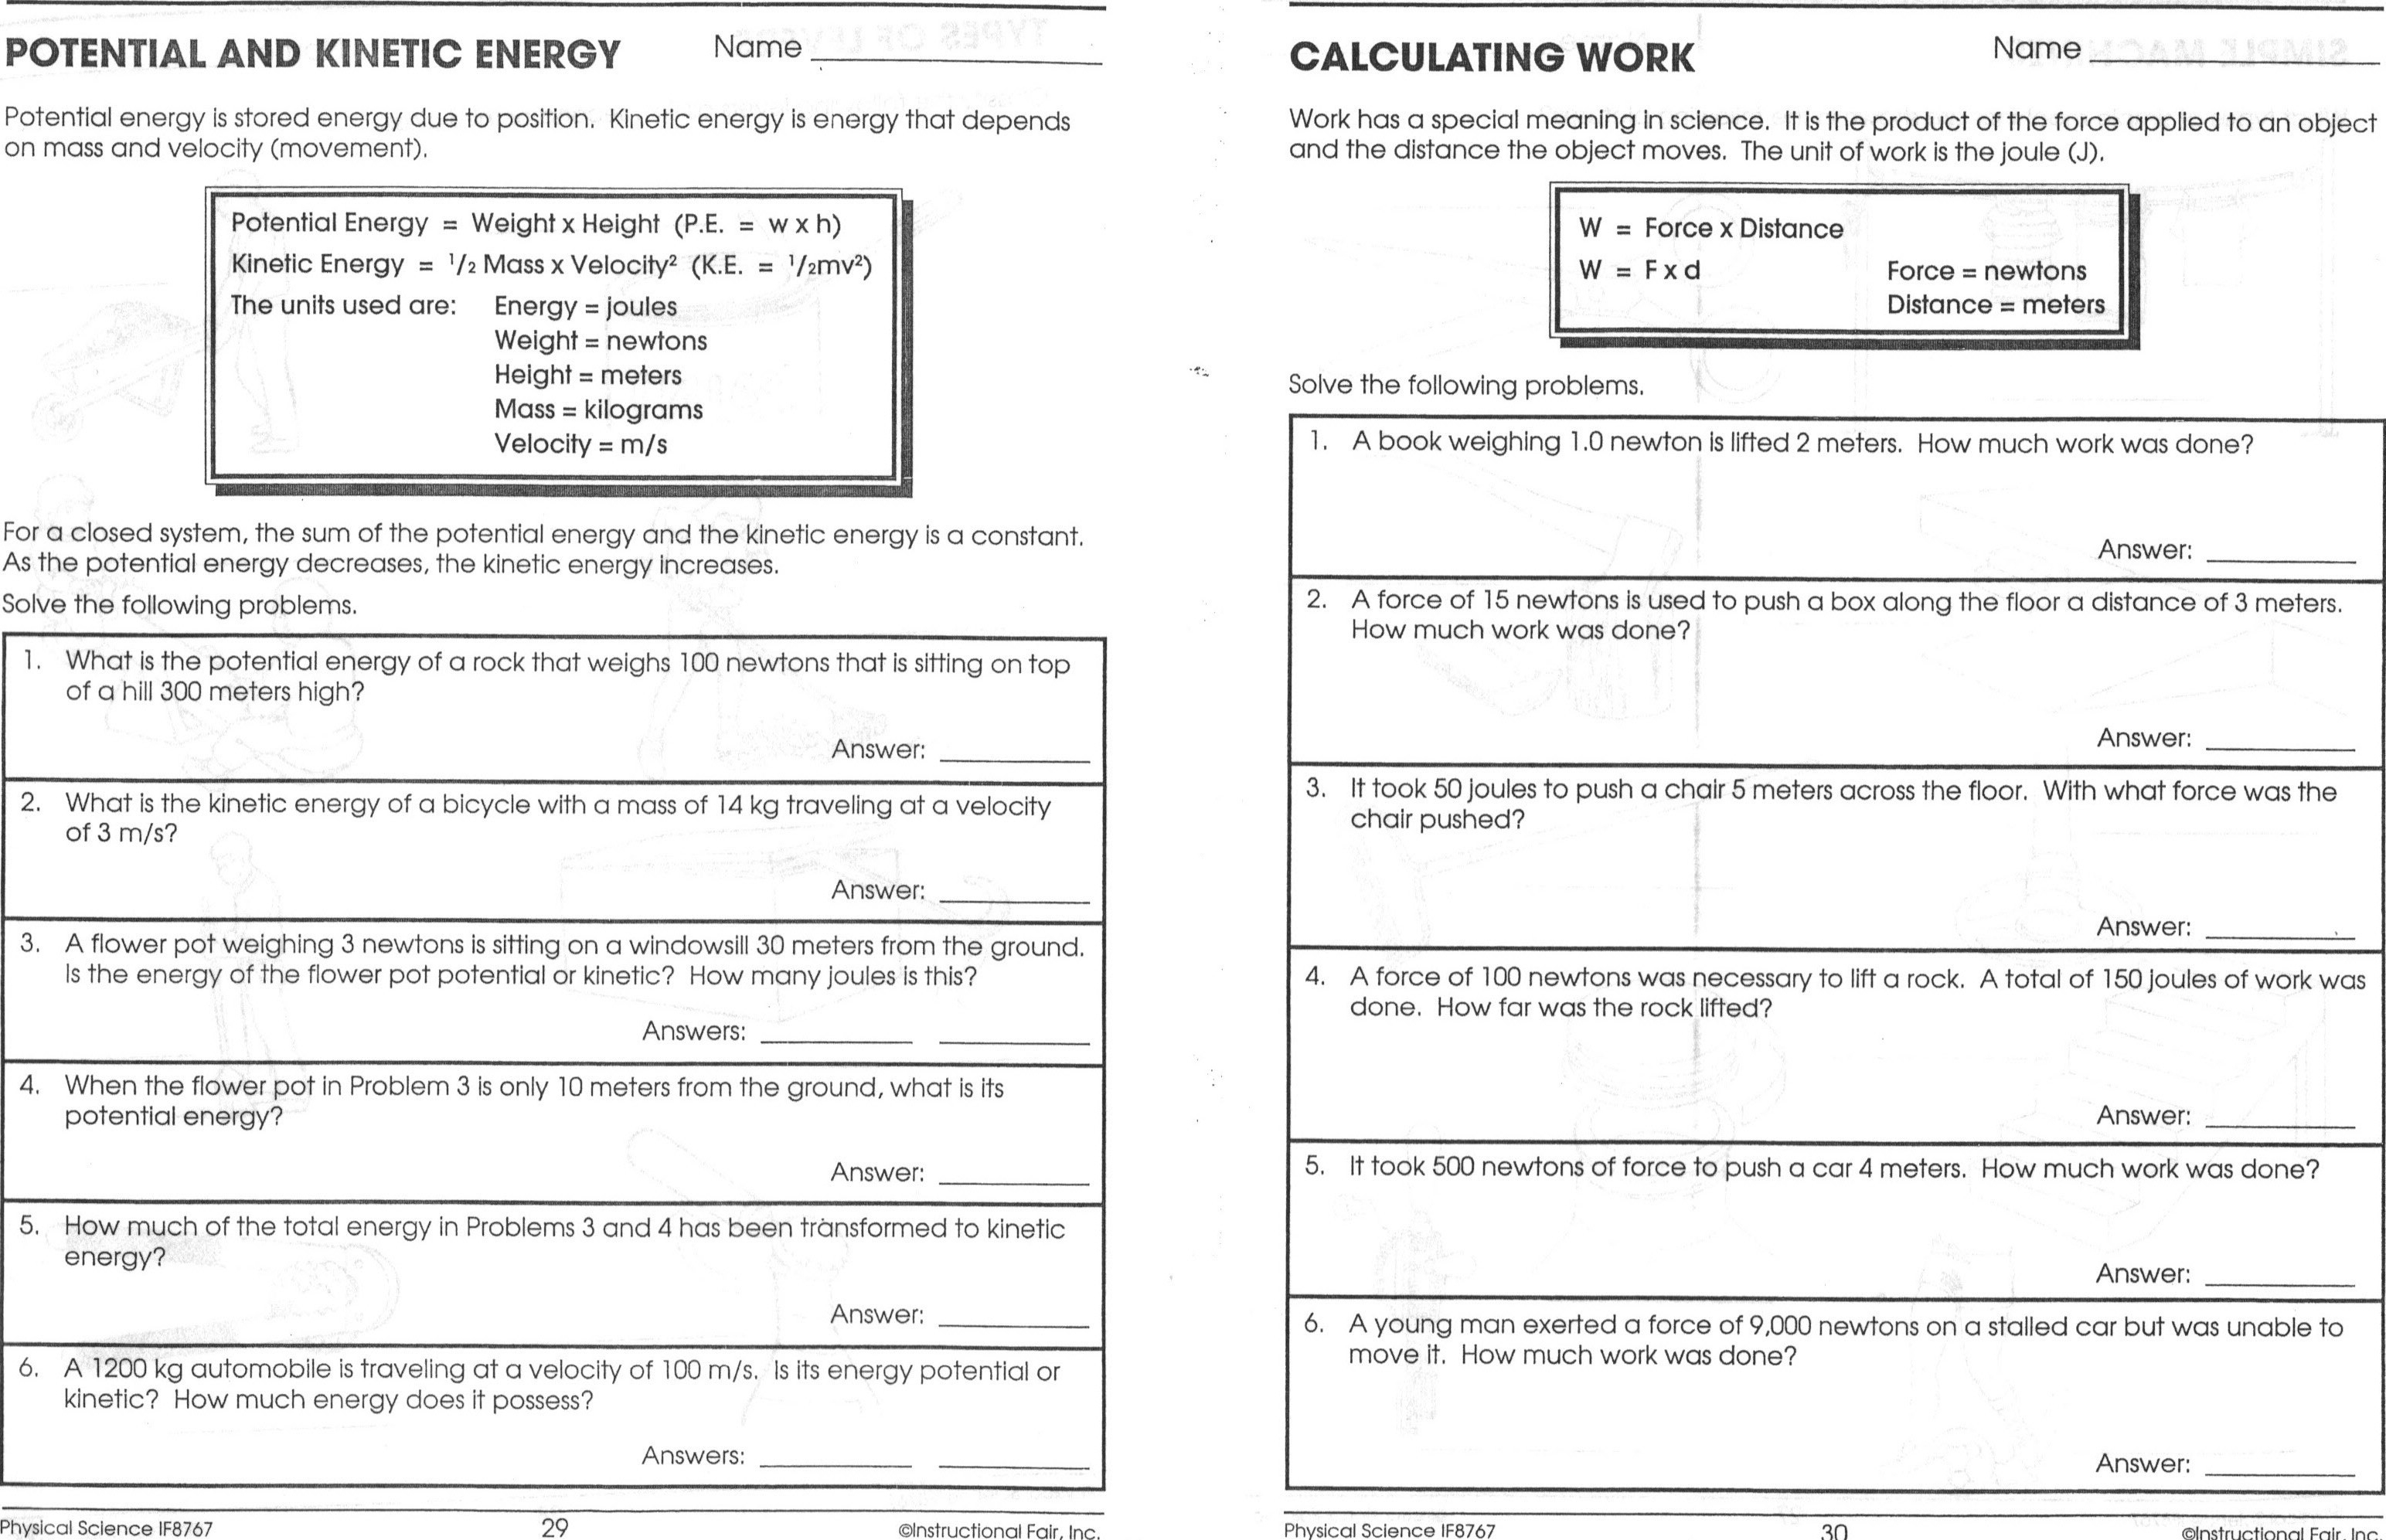 Best Of Potential Vs Kinetic Energy Worksheet Answers New Collection - Free Printable Worksheets On Potential And Kinetic Energy